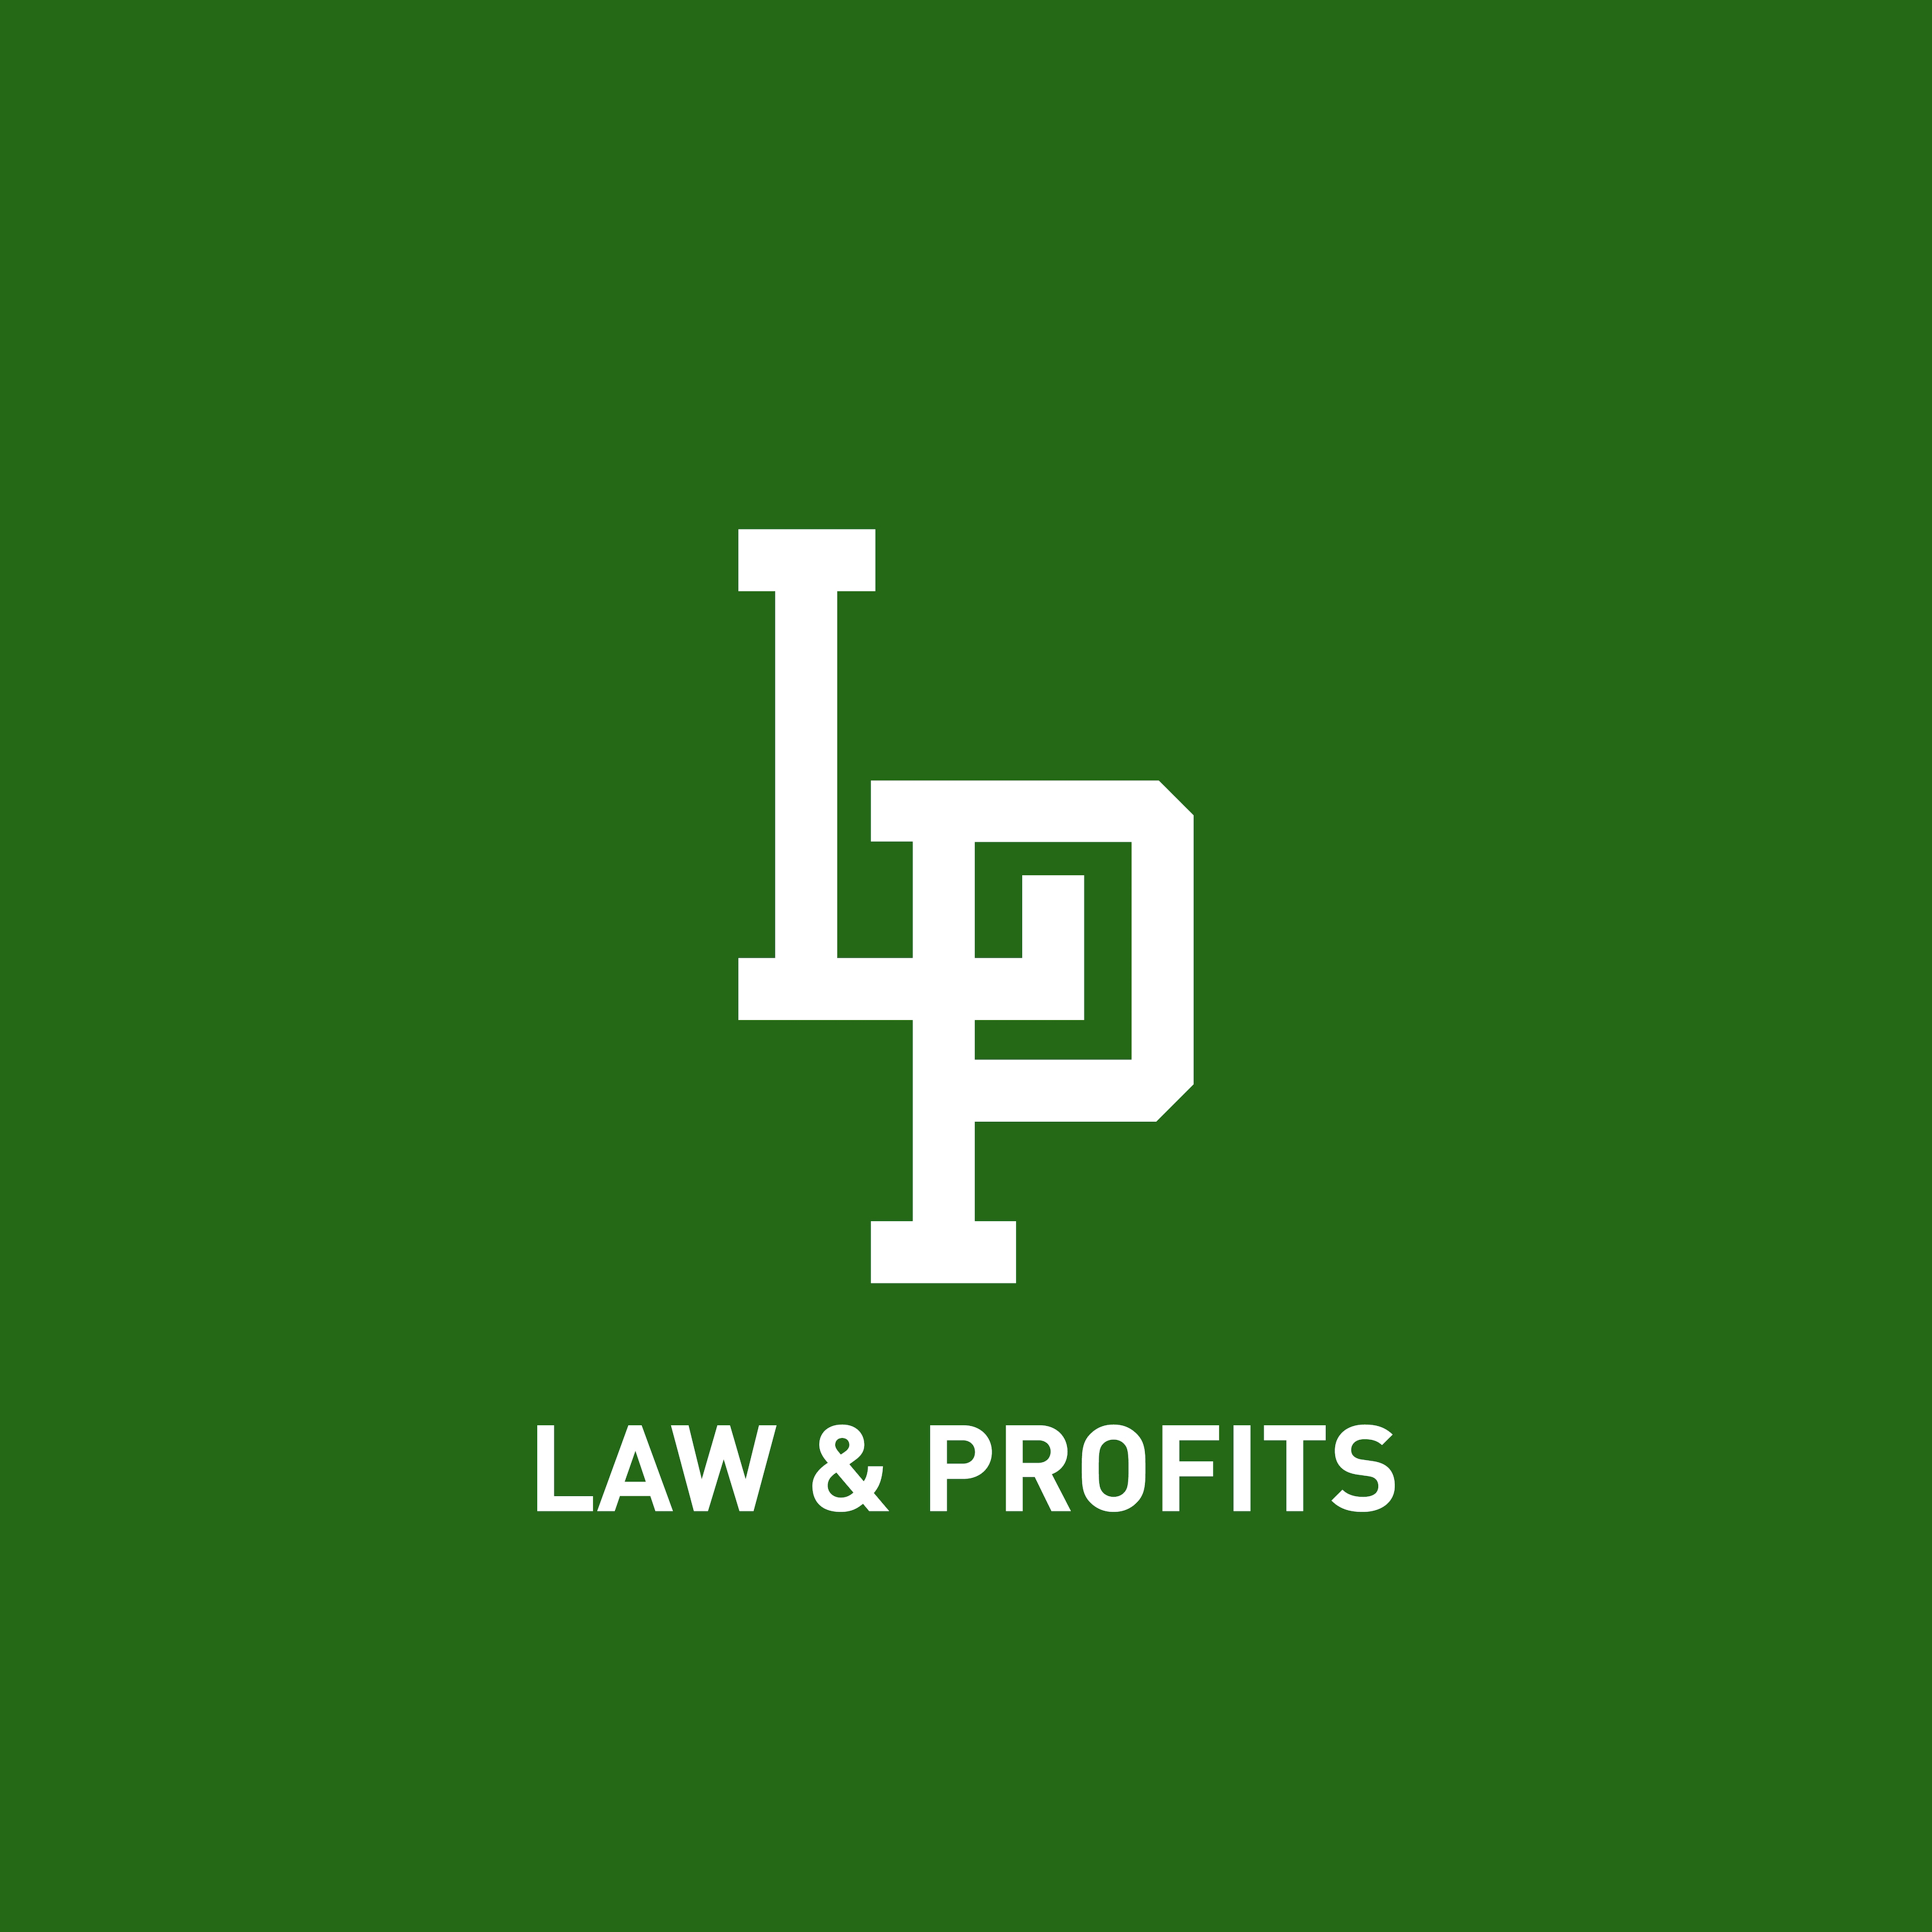 L&P – Property Rights, SyeTenB and John Rodgers